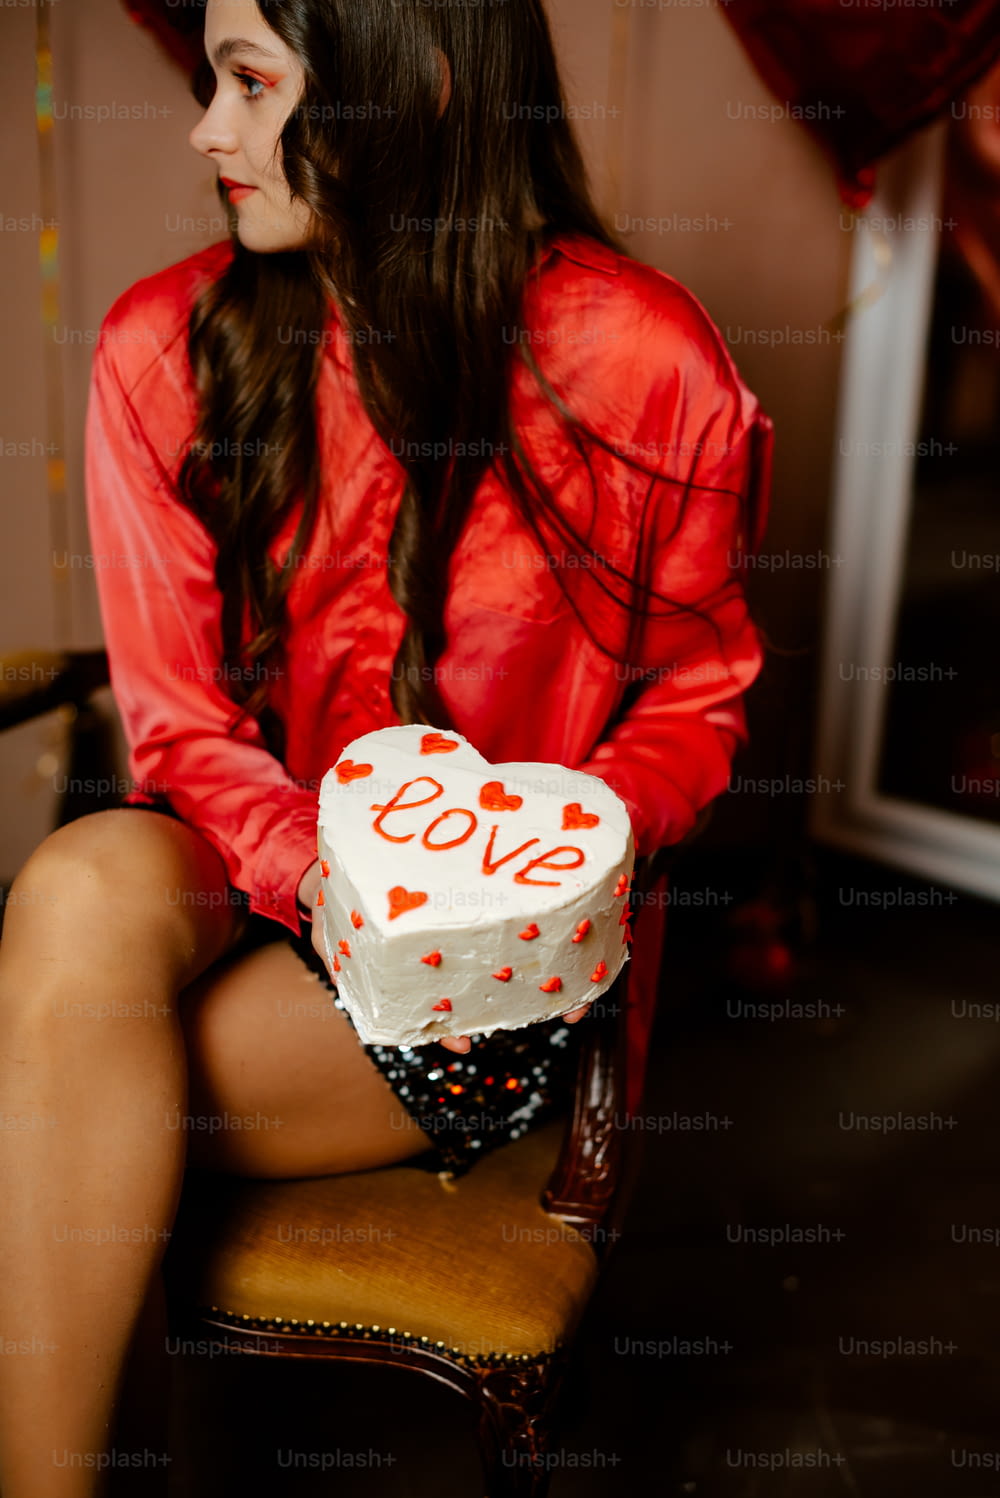 a woman sitting on a chair with a cake in front of her